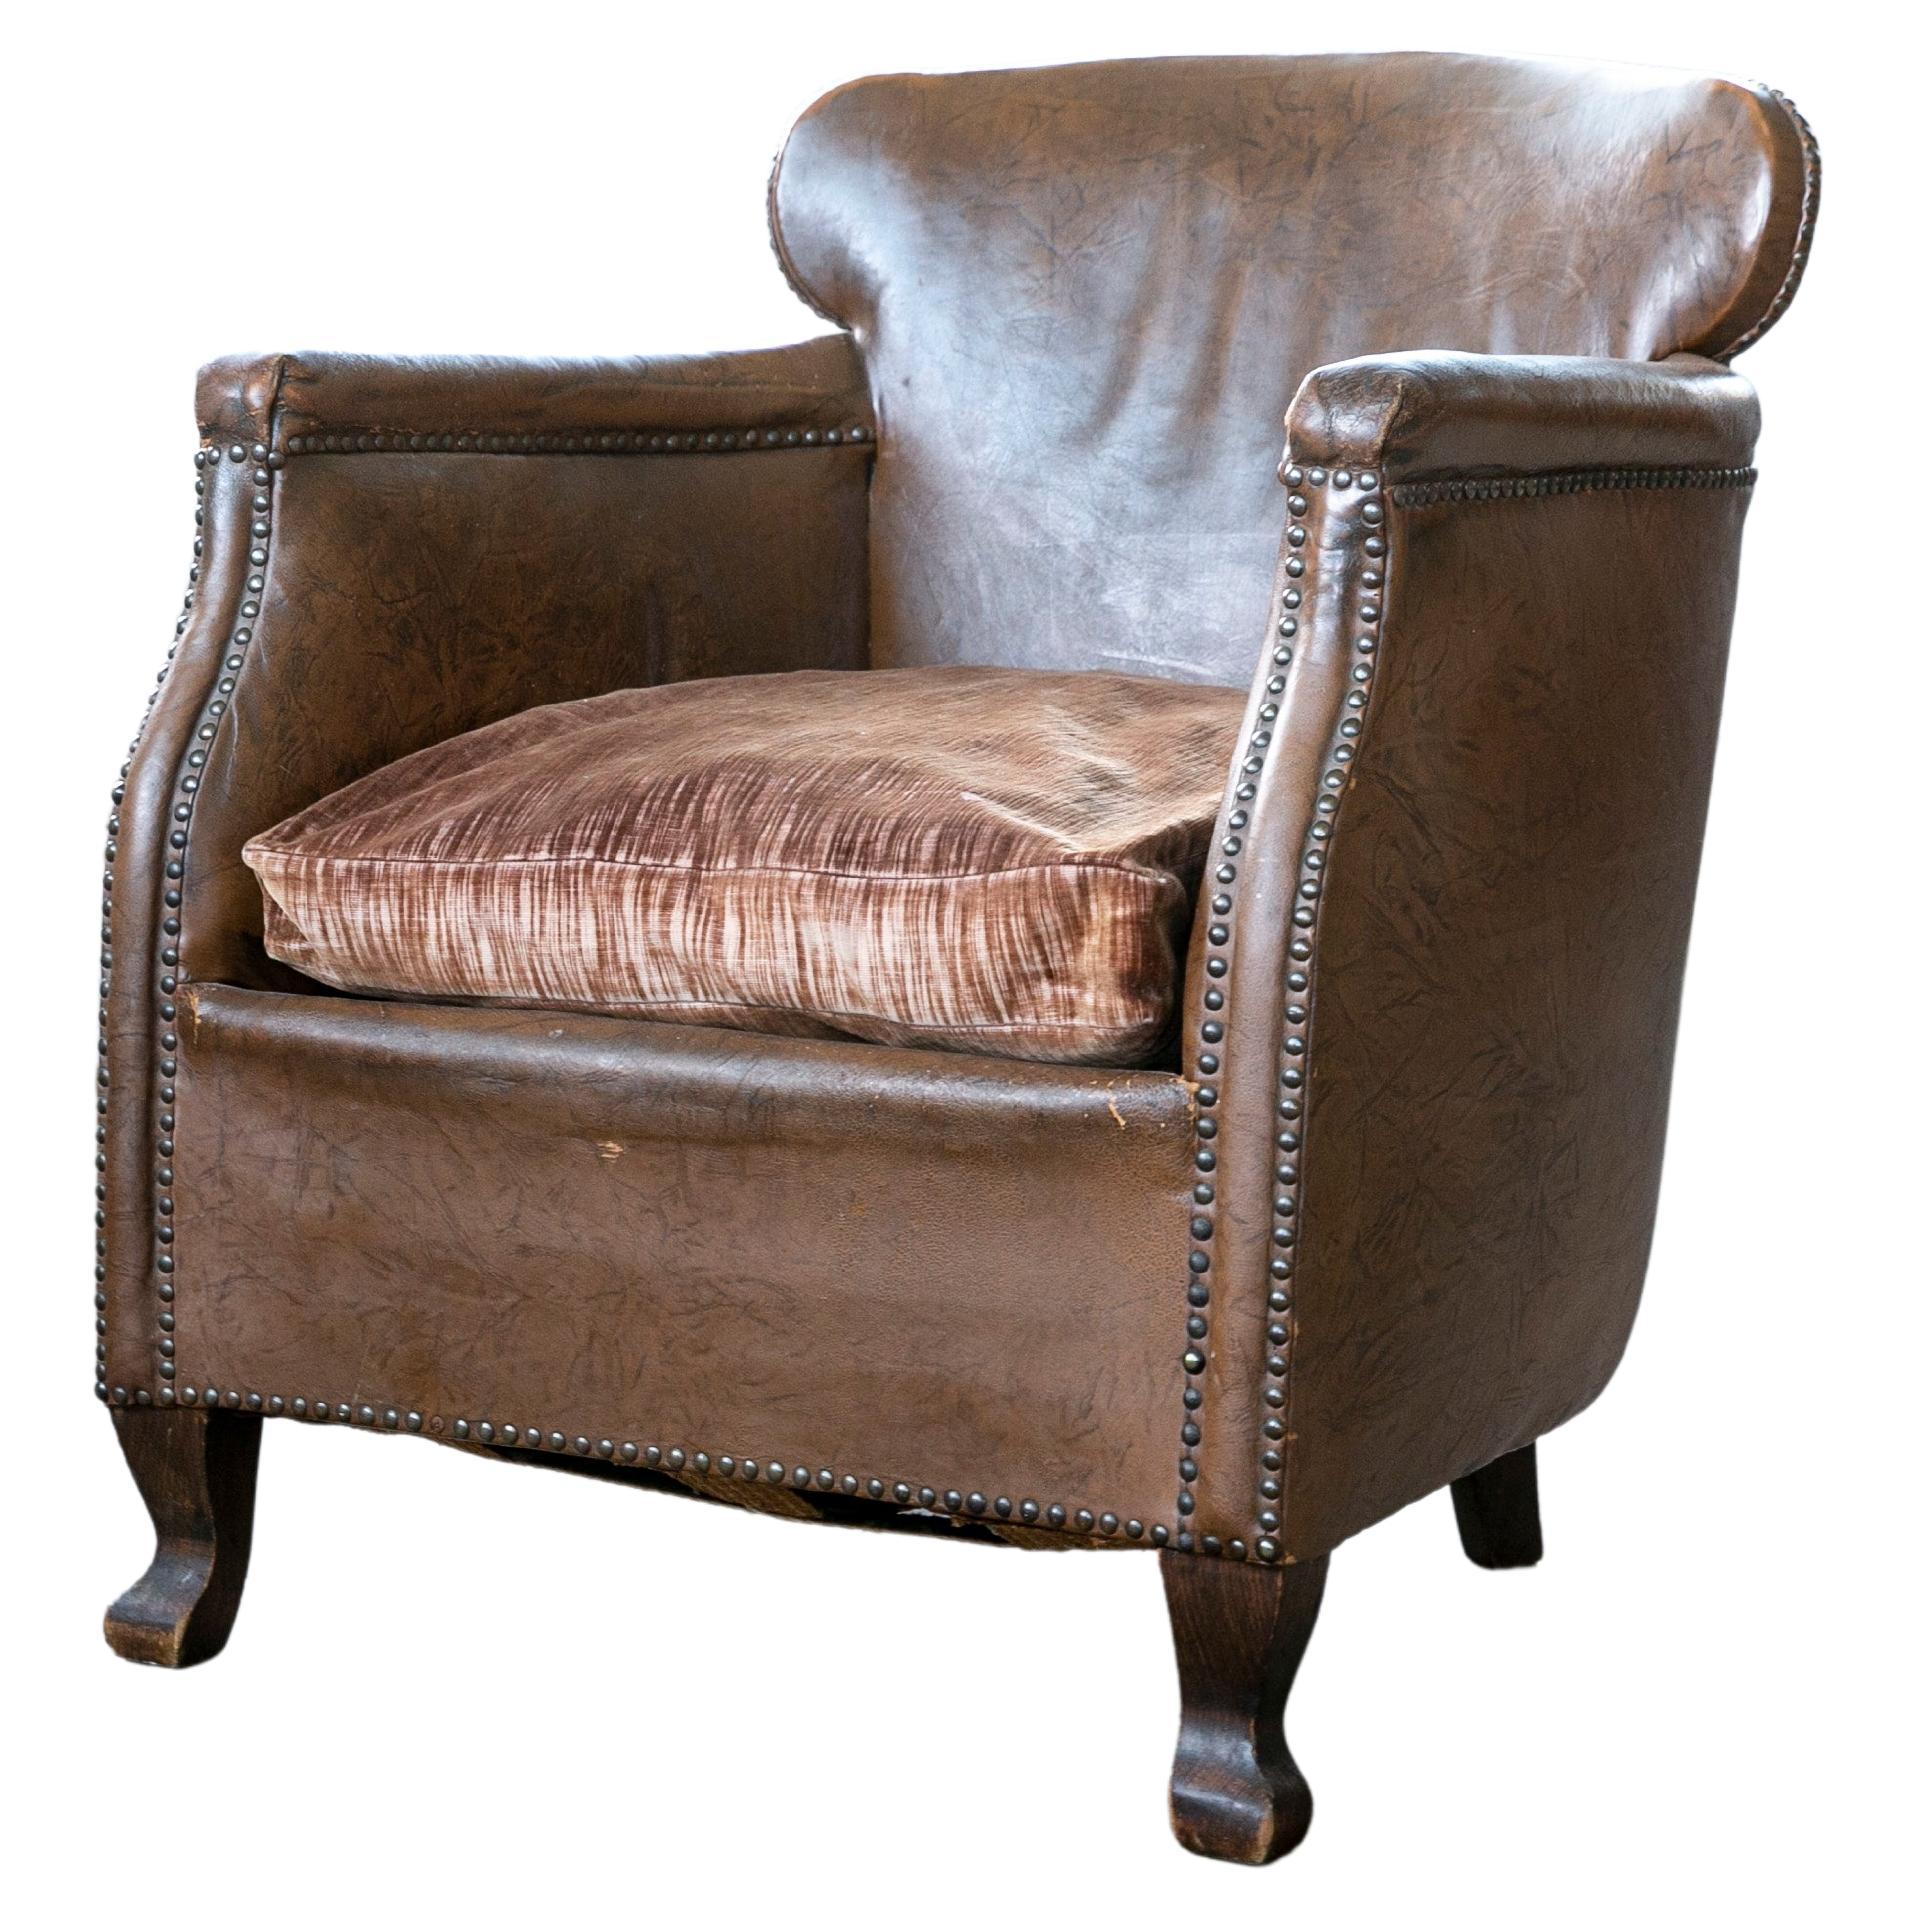 Danish 1930-40s Small-Scale Club Chair in Cognac Leather with Cabriole Legs